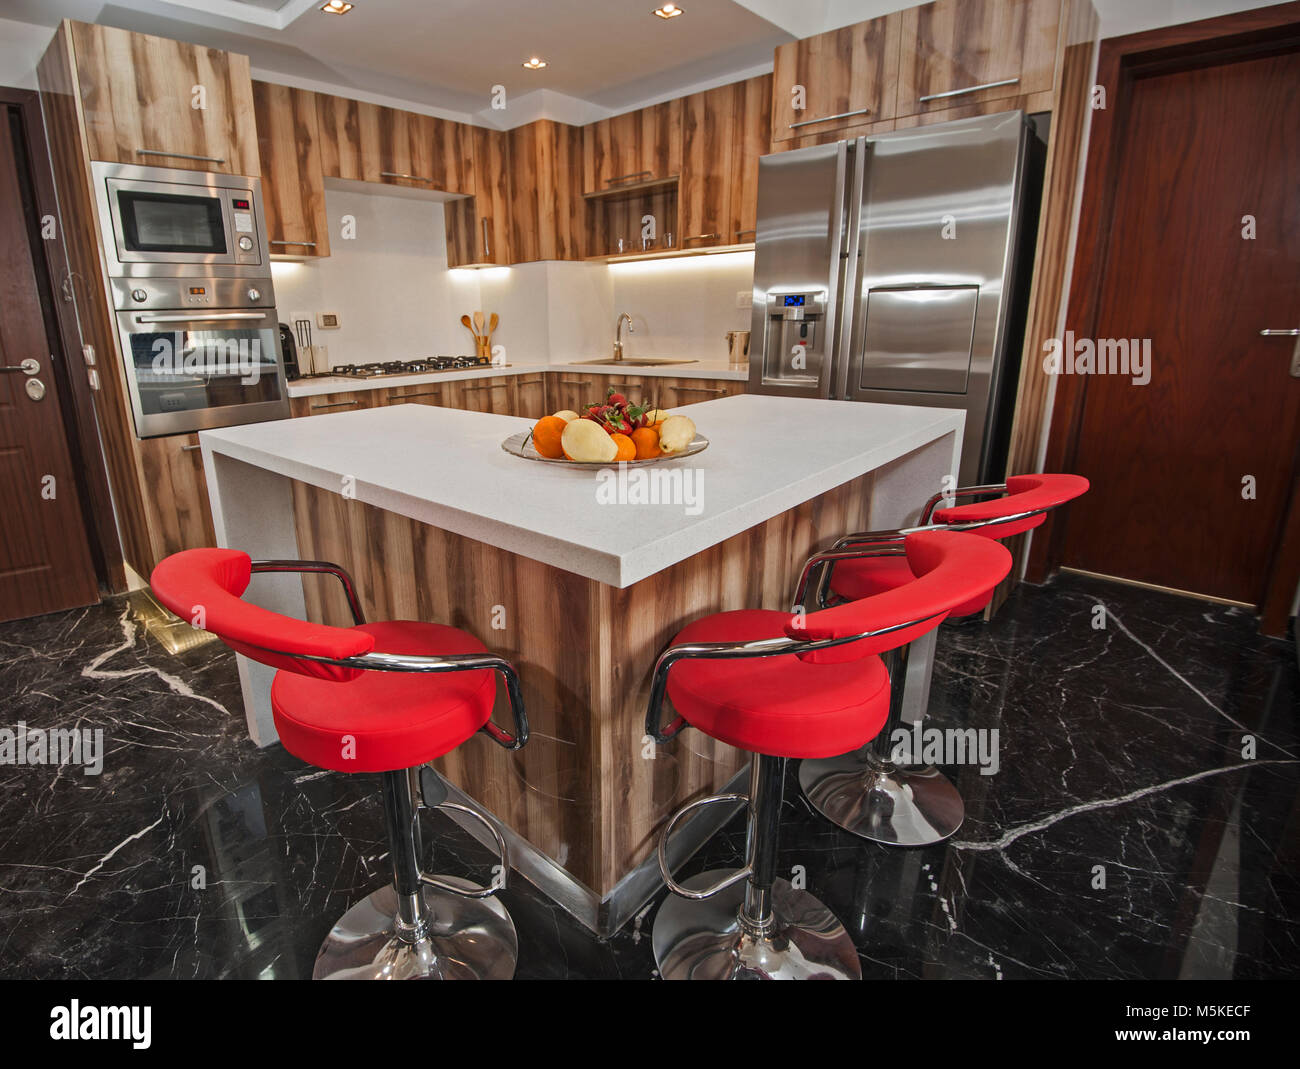 Interior design decor showing modern kitchen and appliances in luxury apartment showroom with island Stock Photo